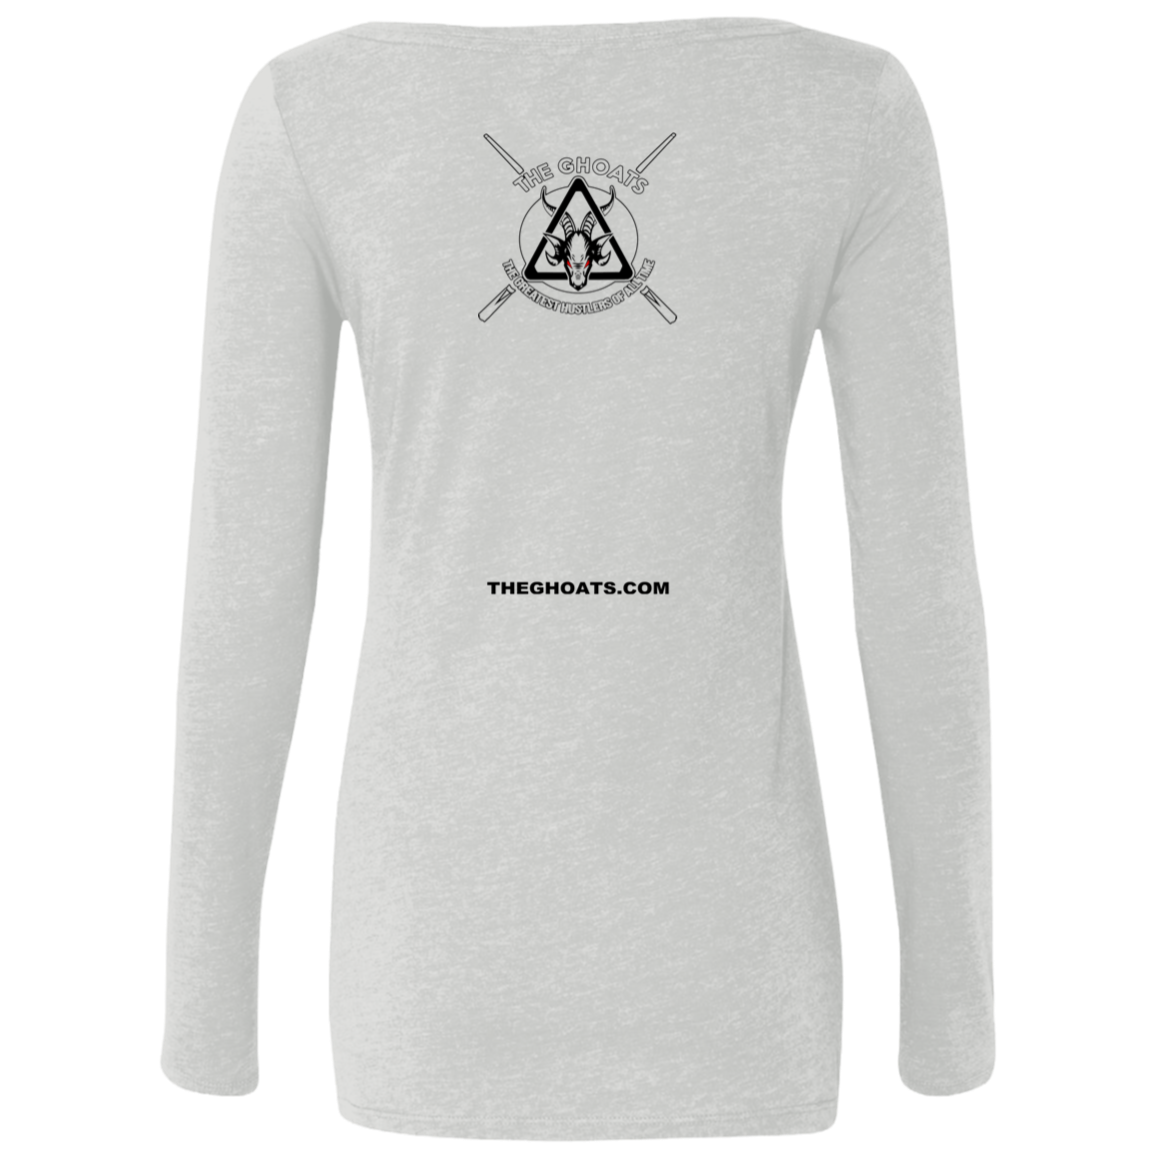 The GHOATS Custom Design #17. Inches From Greatness. Ladies' Triblend LS Scoop